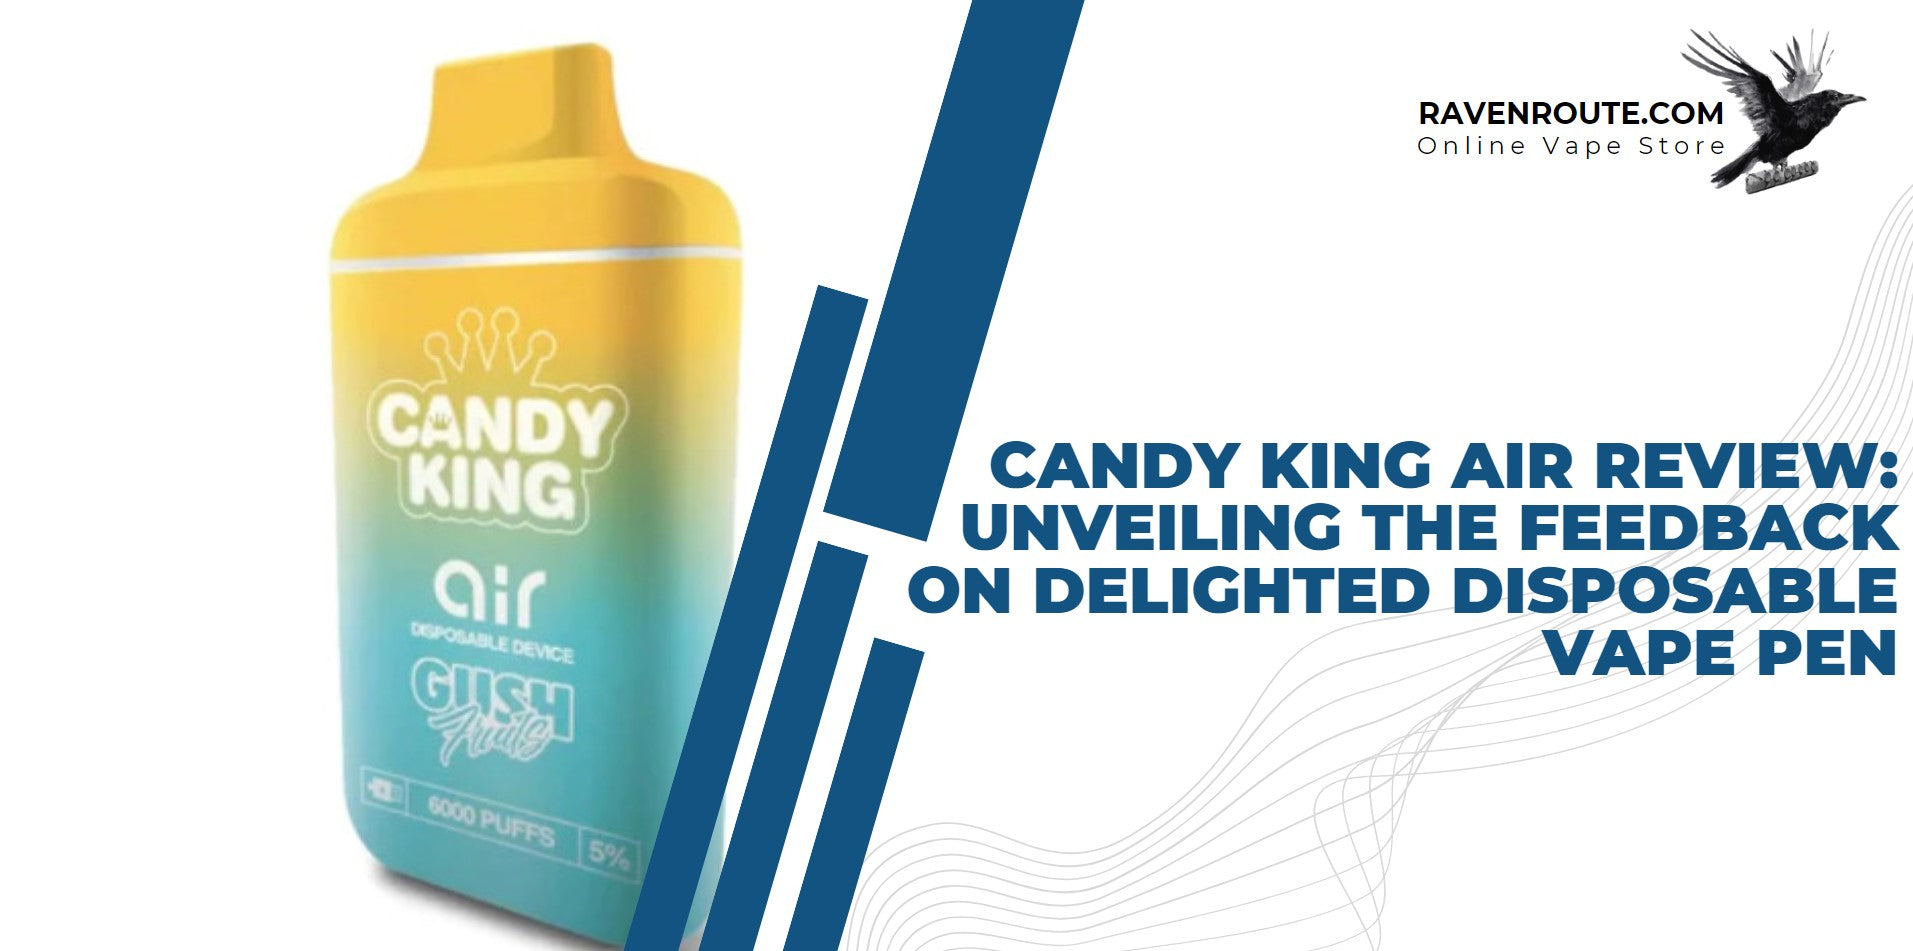 Candy King Air Review: Unveiling the Feedback on Delighted Disposable Vape Pen